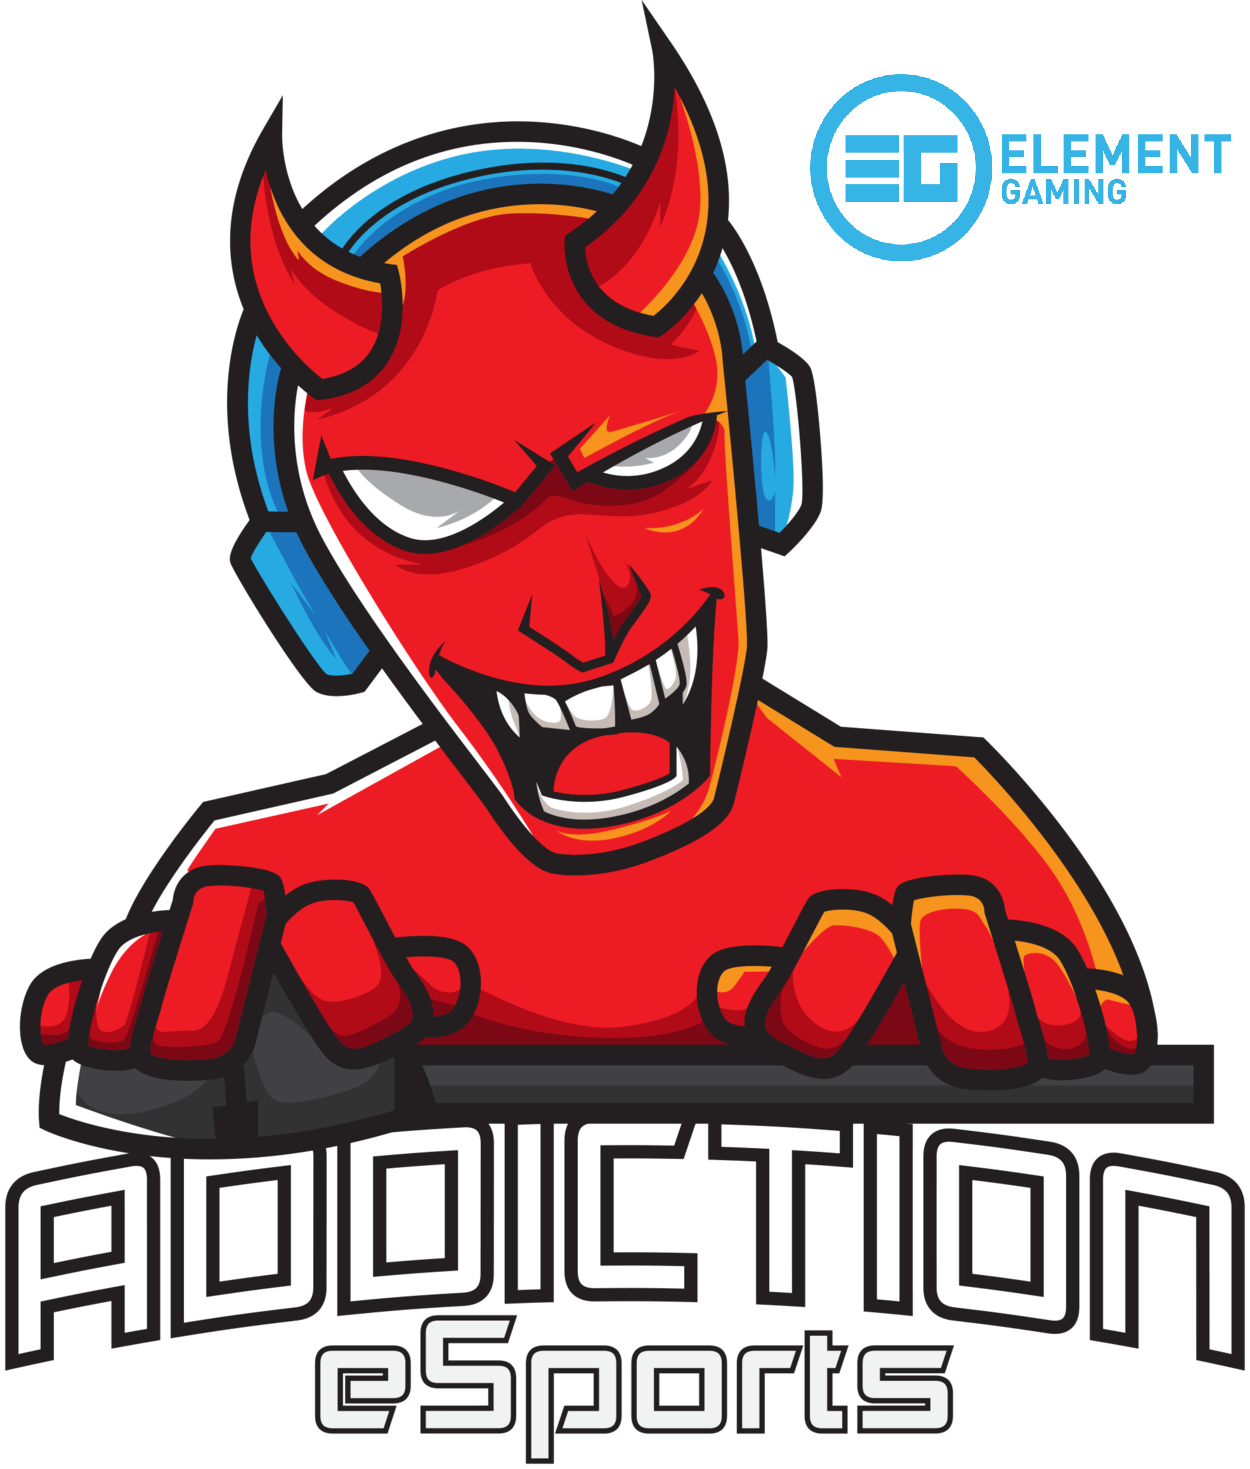 Element Gaming Logo - Element are addicted to gaming | Element Gaming